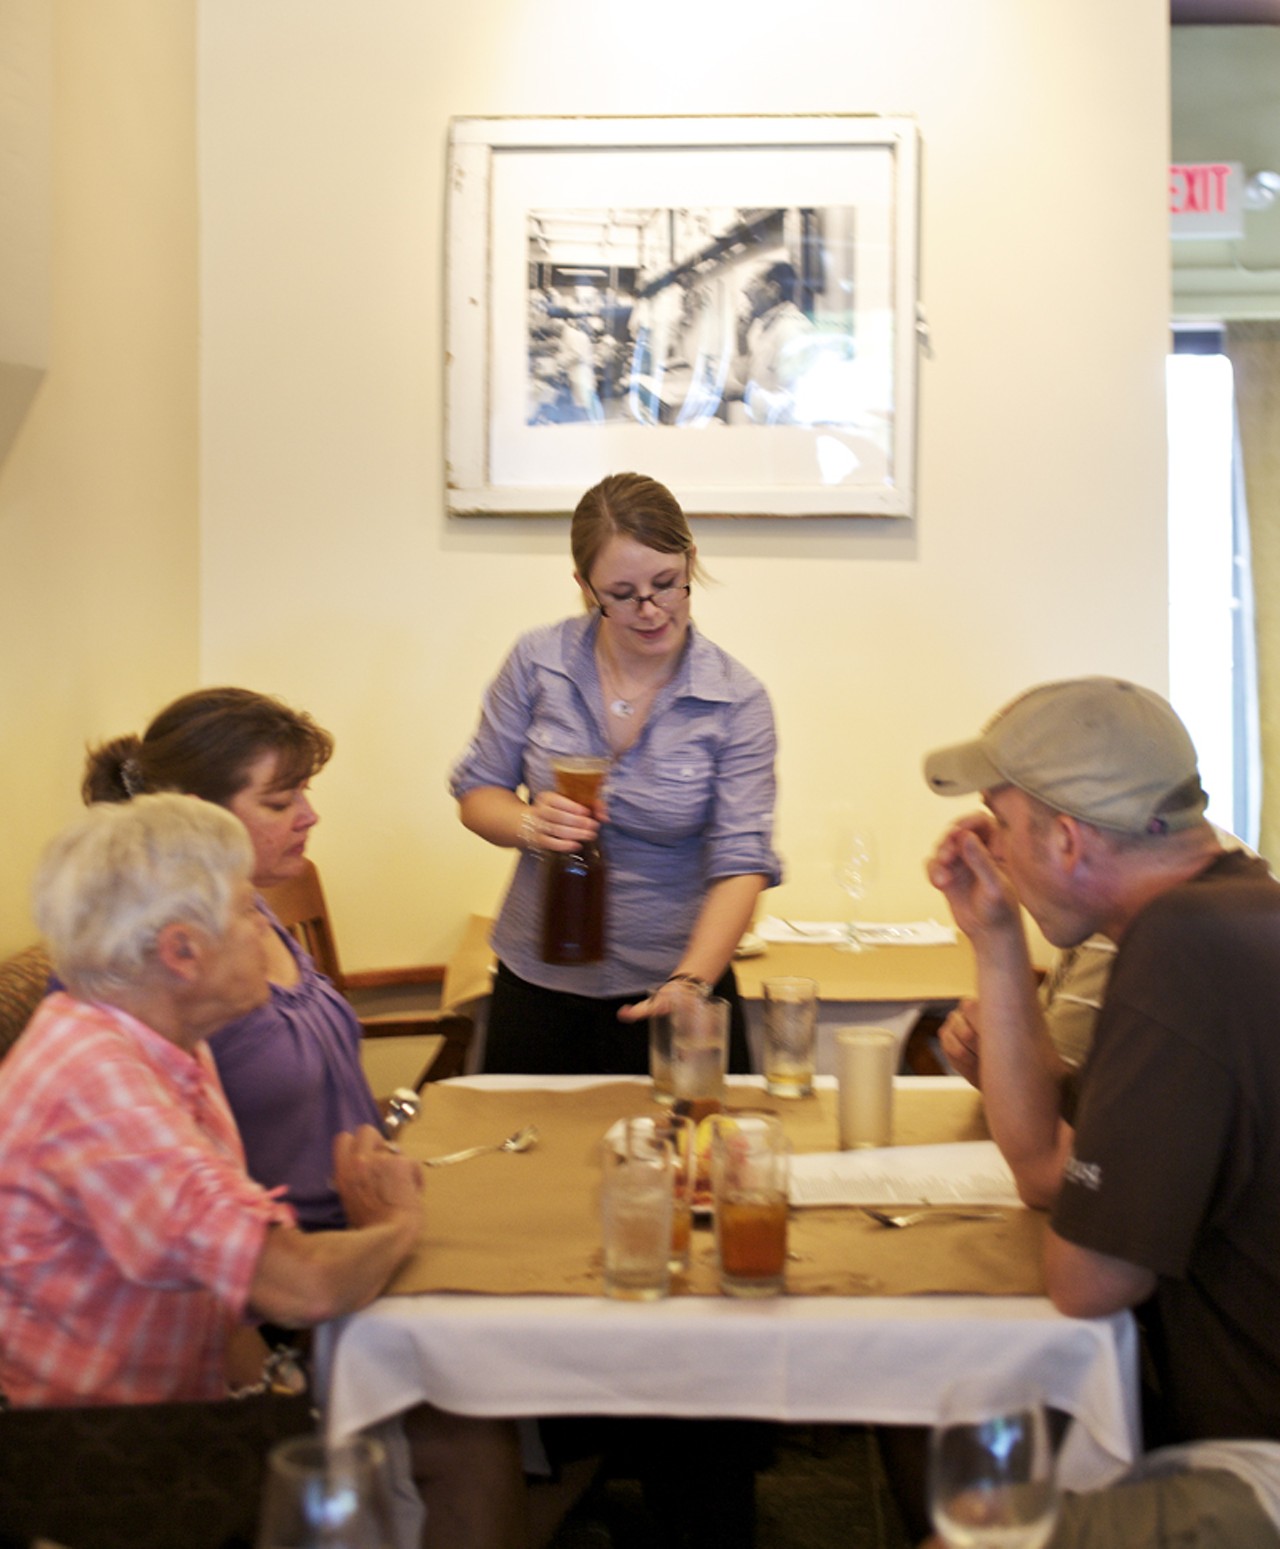 Server Tiffany Diering refilling glasses and going over dessert options with customers during lunch at Farmhaus.